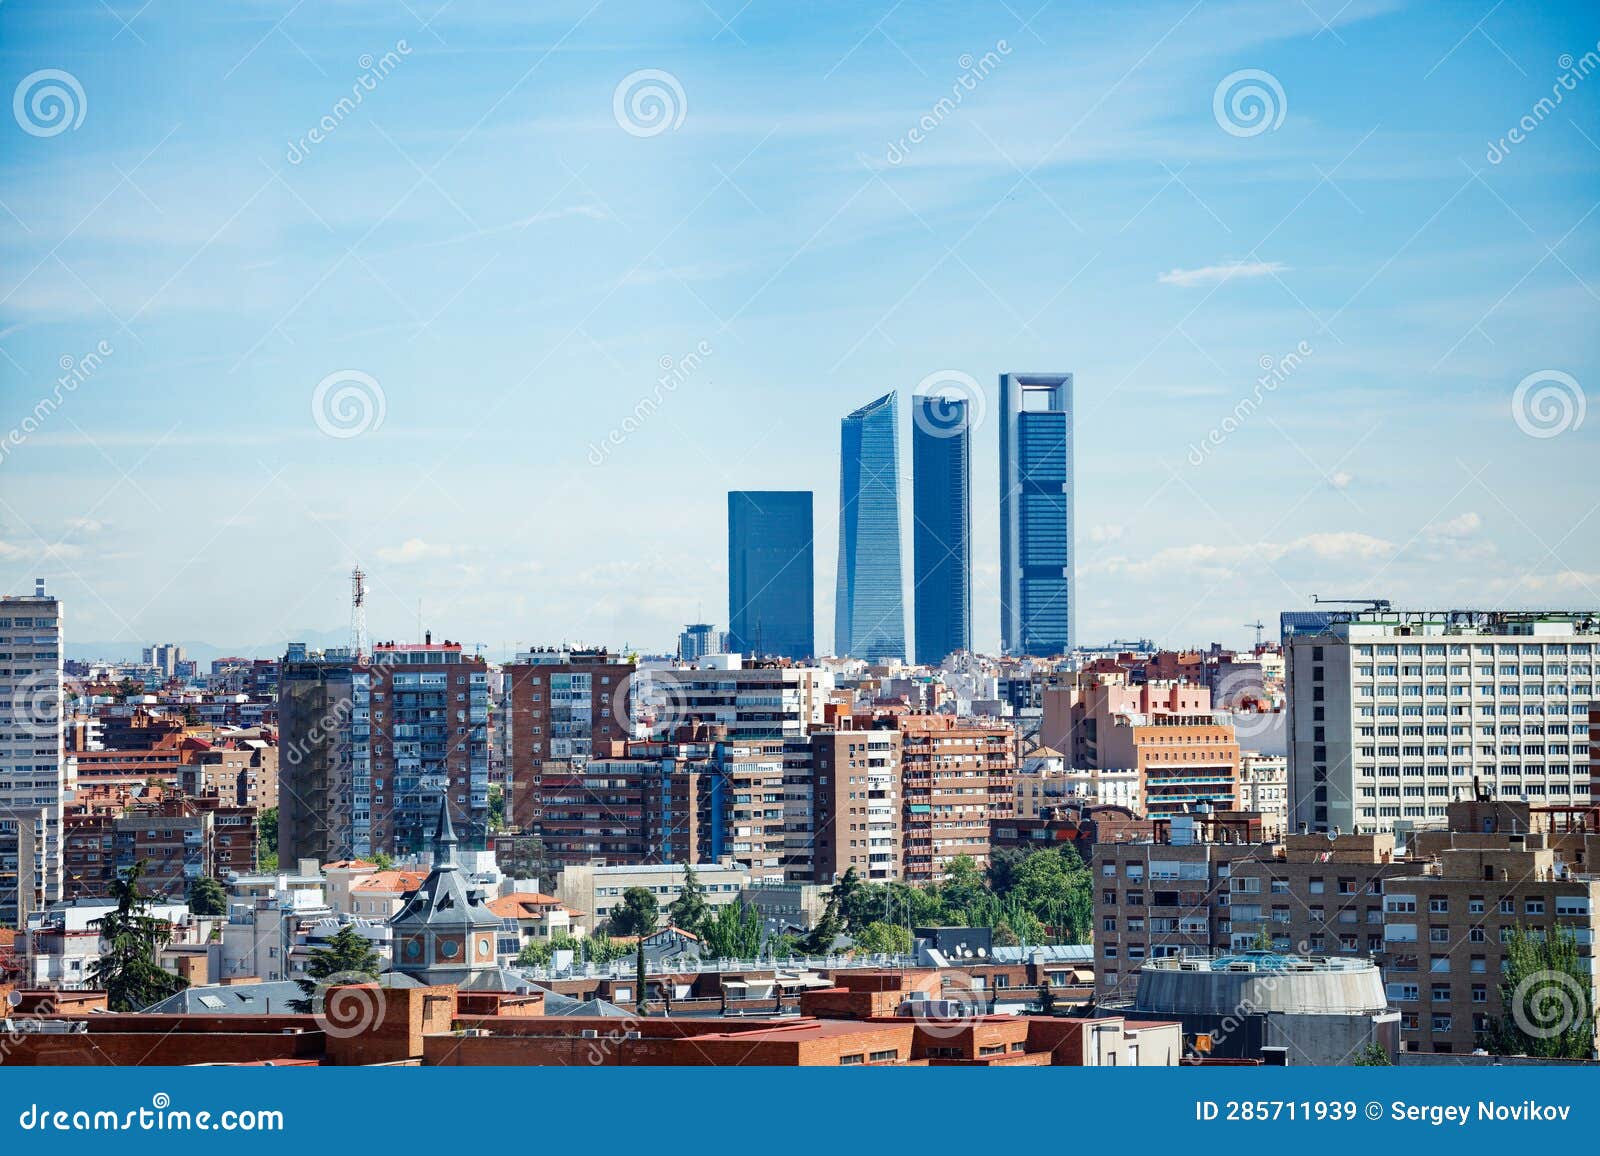 panorama of madrid four towers or cuatro torres business area